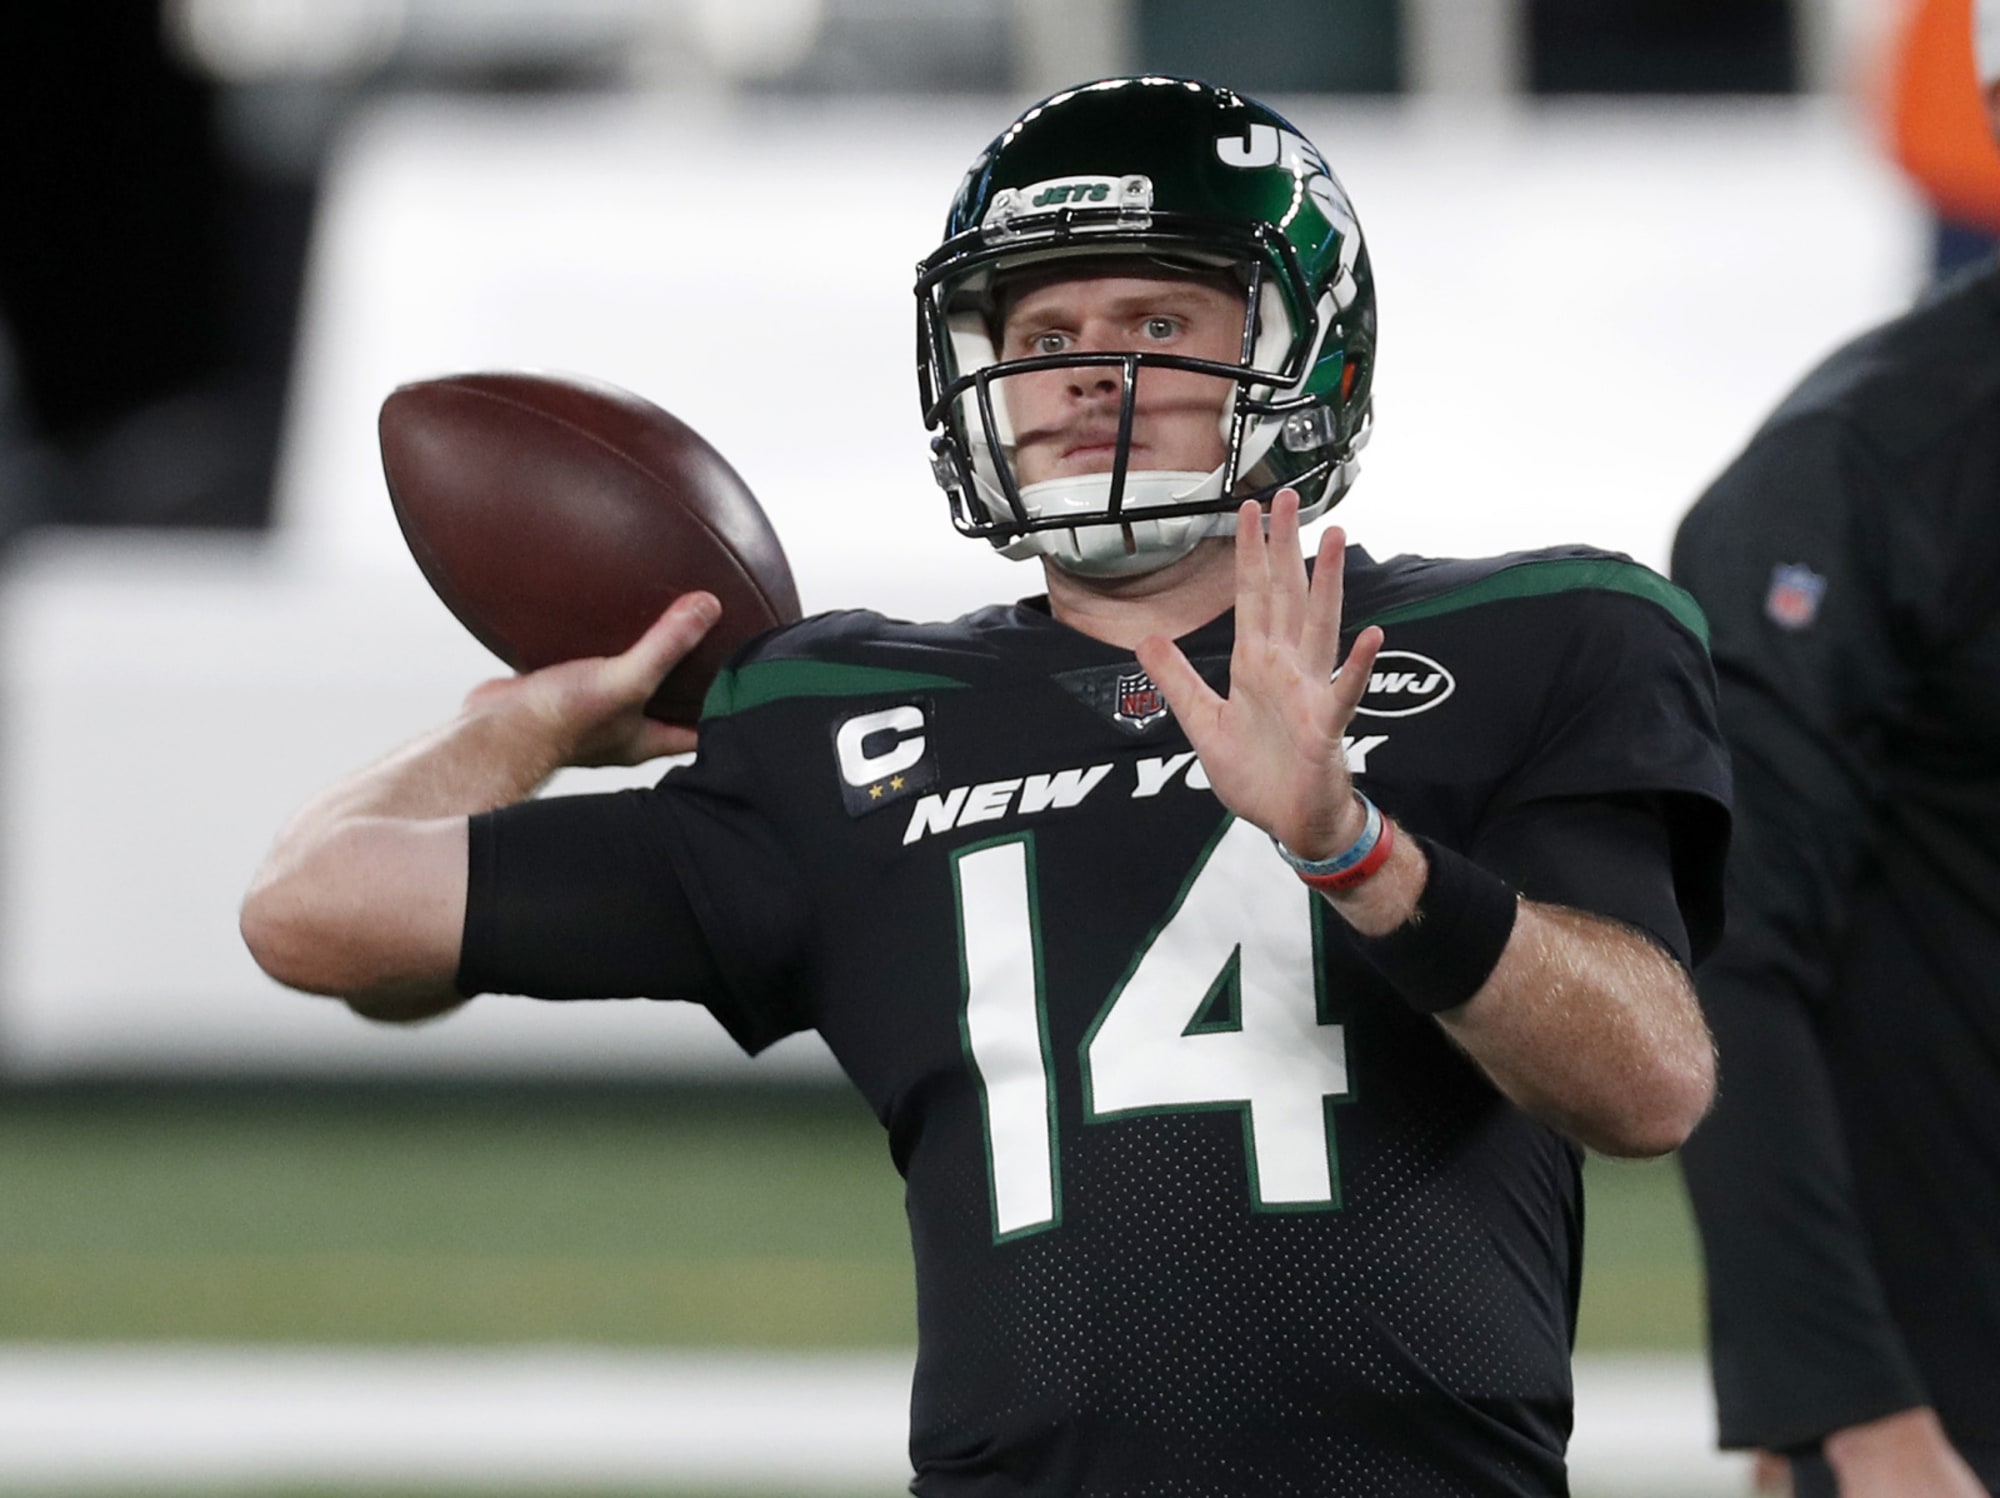 2021 NFL Draft Five quarterbacks who could be traded during the draft